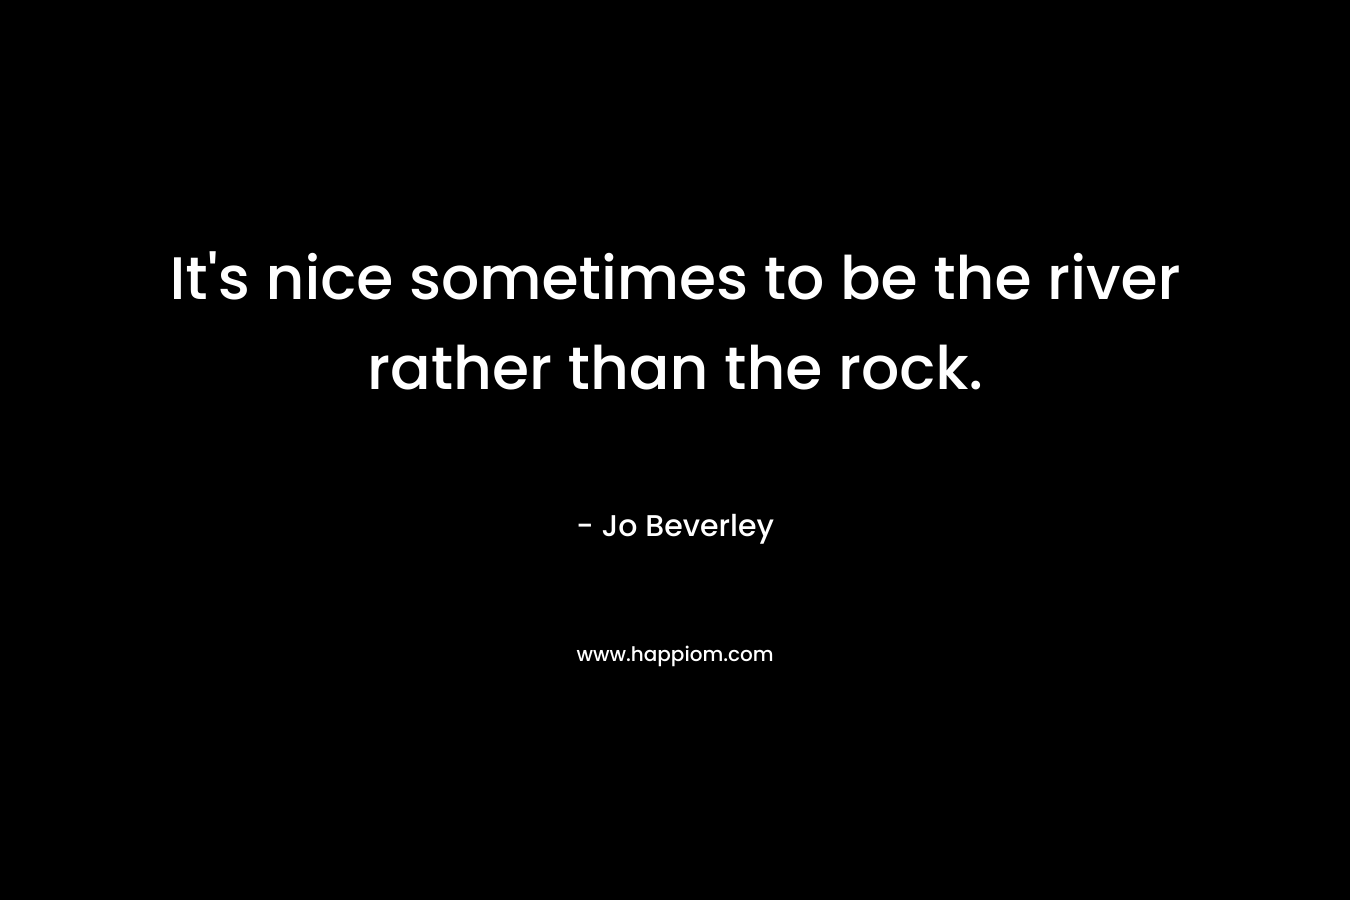 It’s nice sometimes to be the river rather than the rock. – Jo Beverley